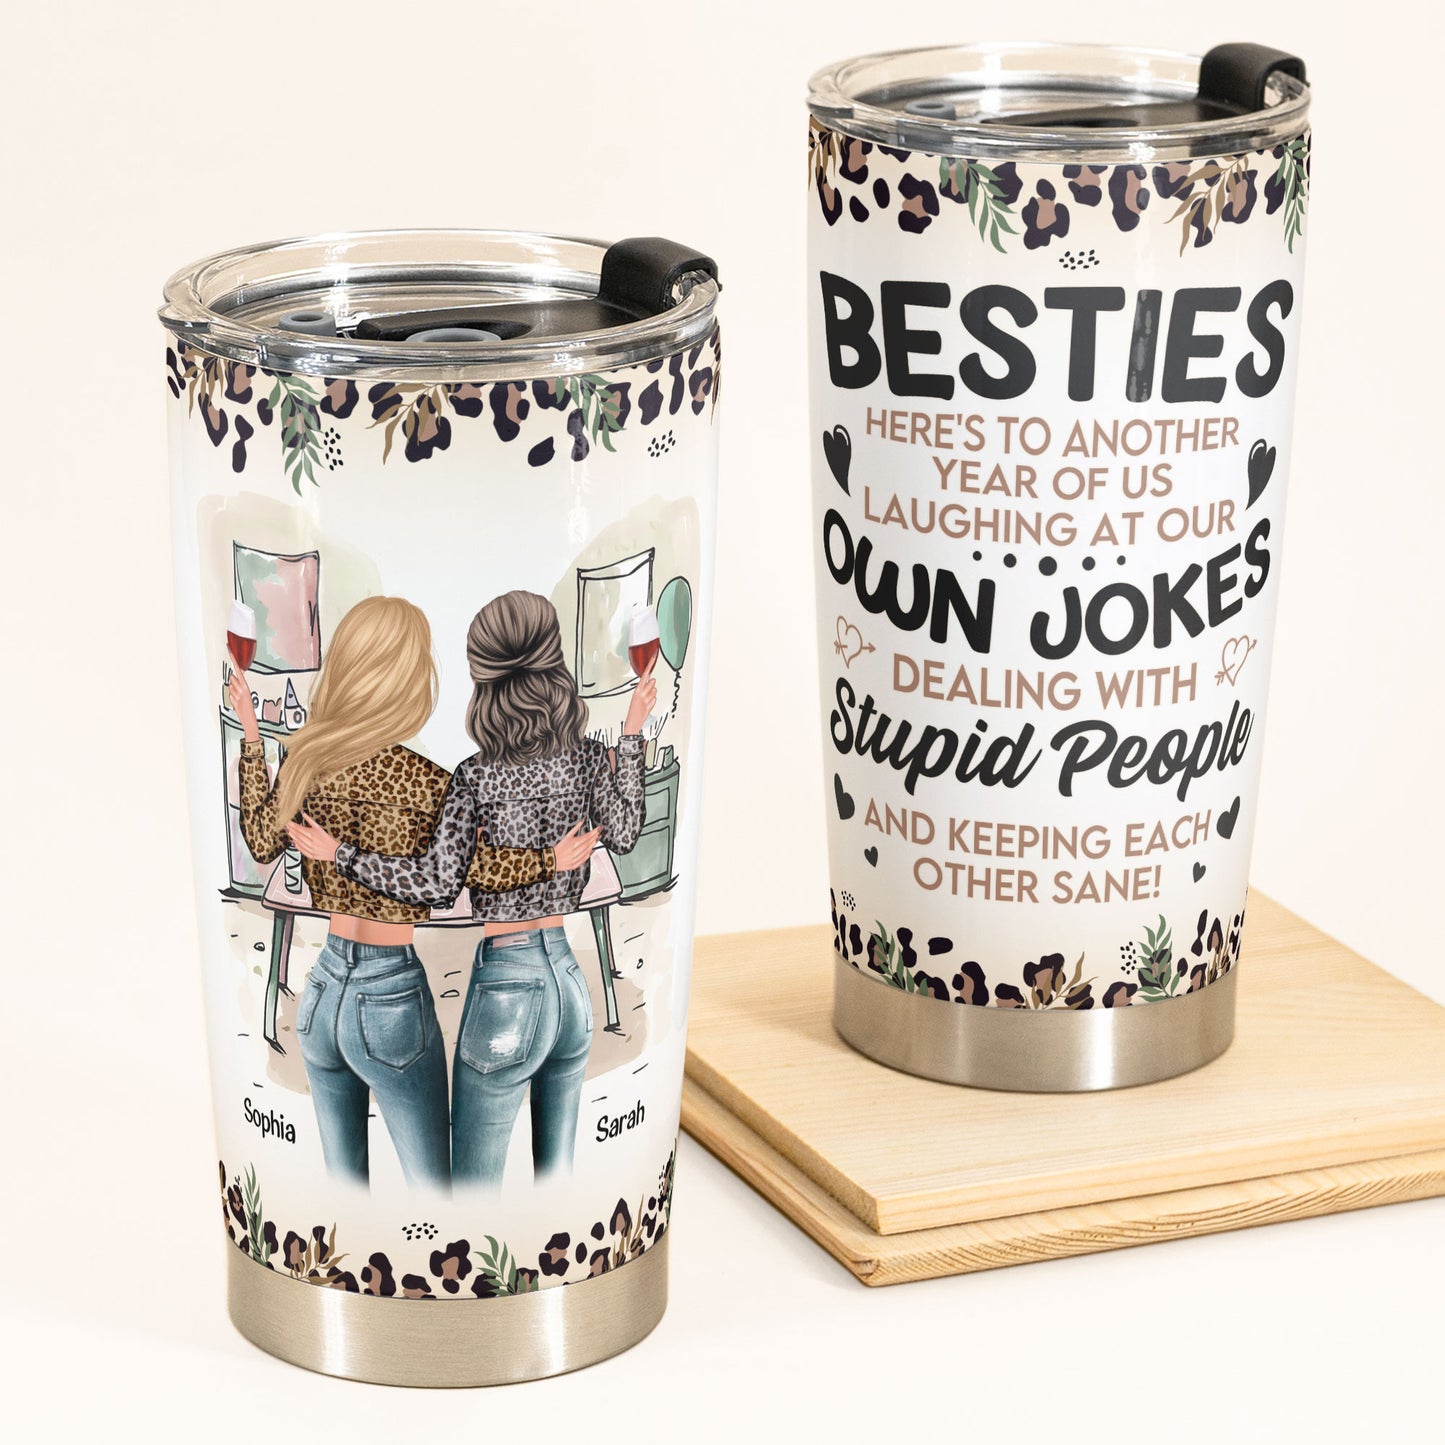 Here's To Another Year Of Us Besties Friends - Personalized Tumbler Cup